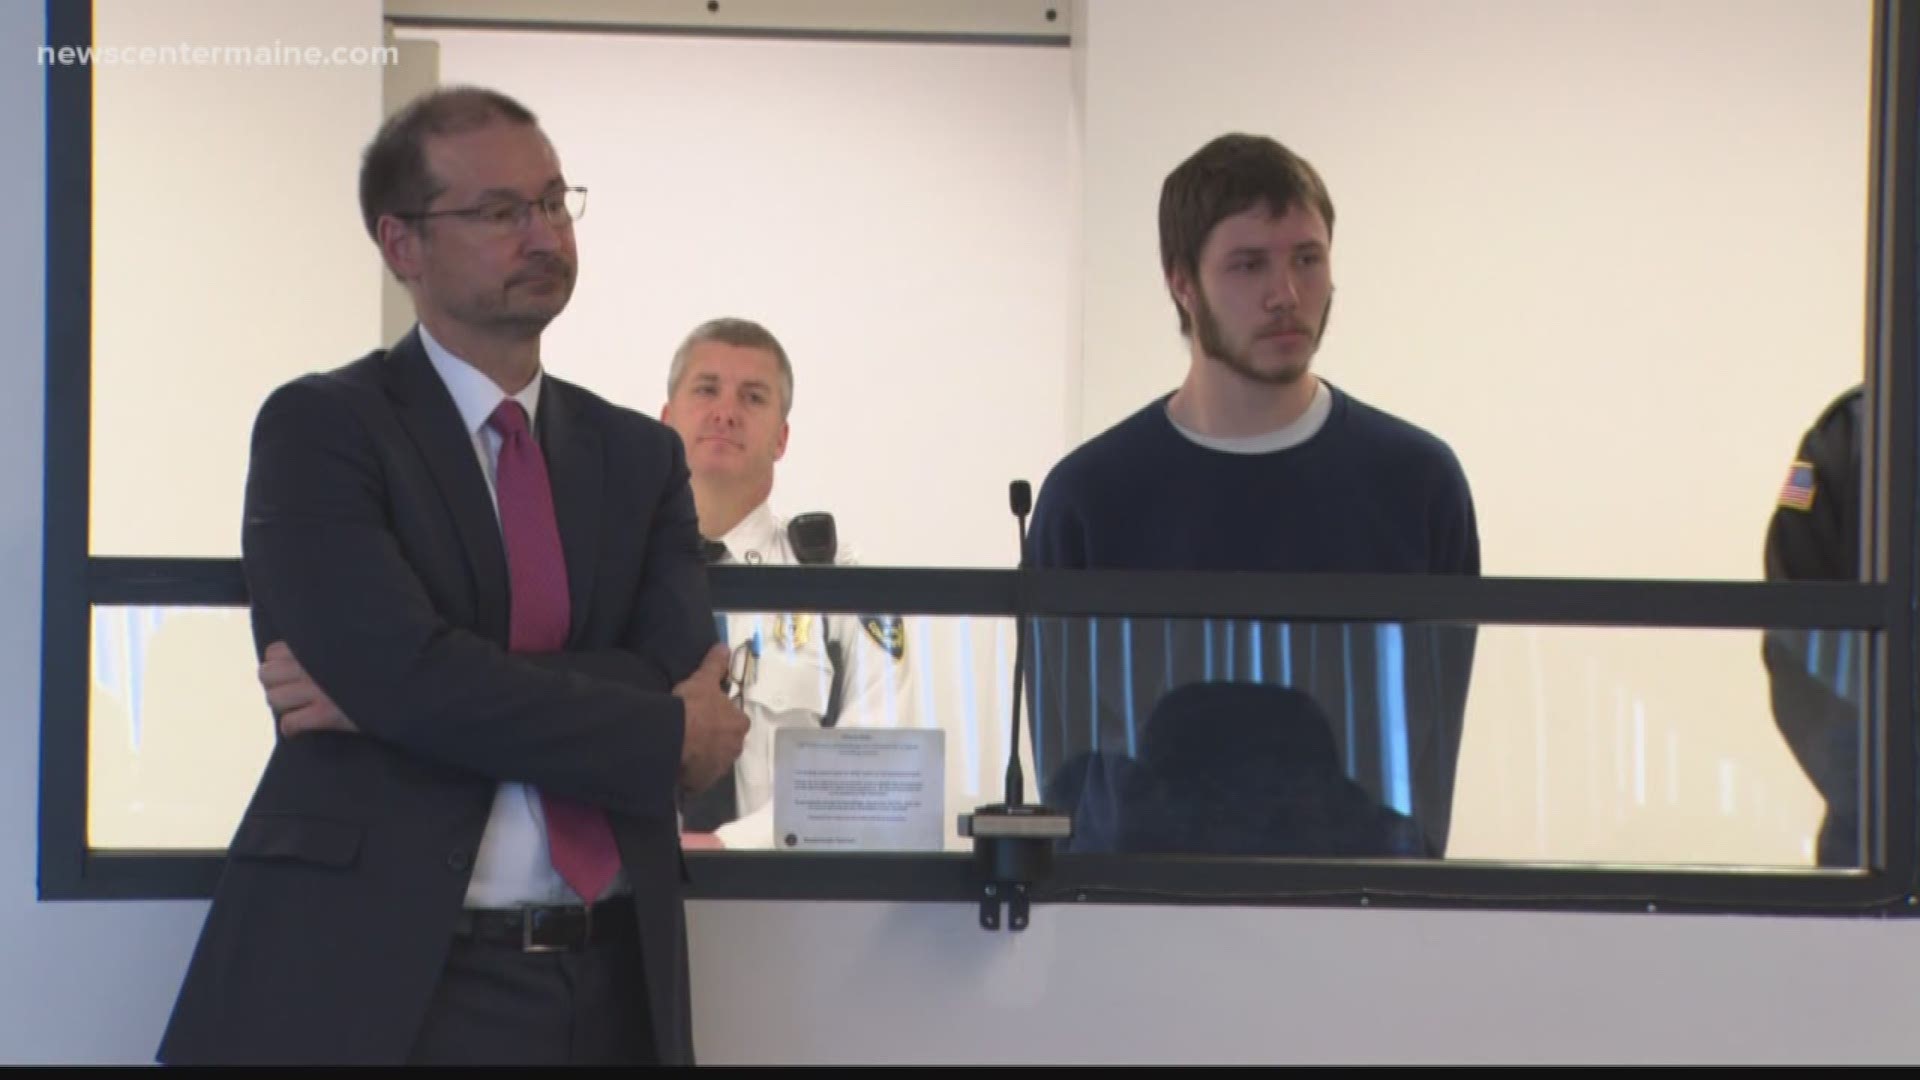 Krause pleads not guilty in Mass court